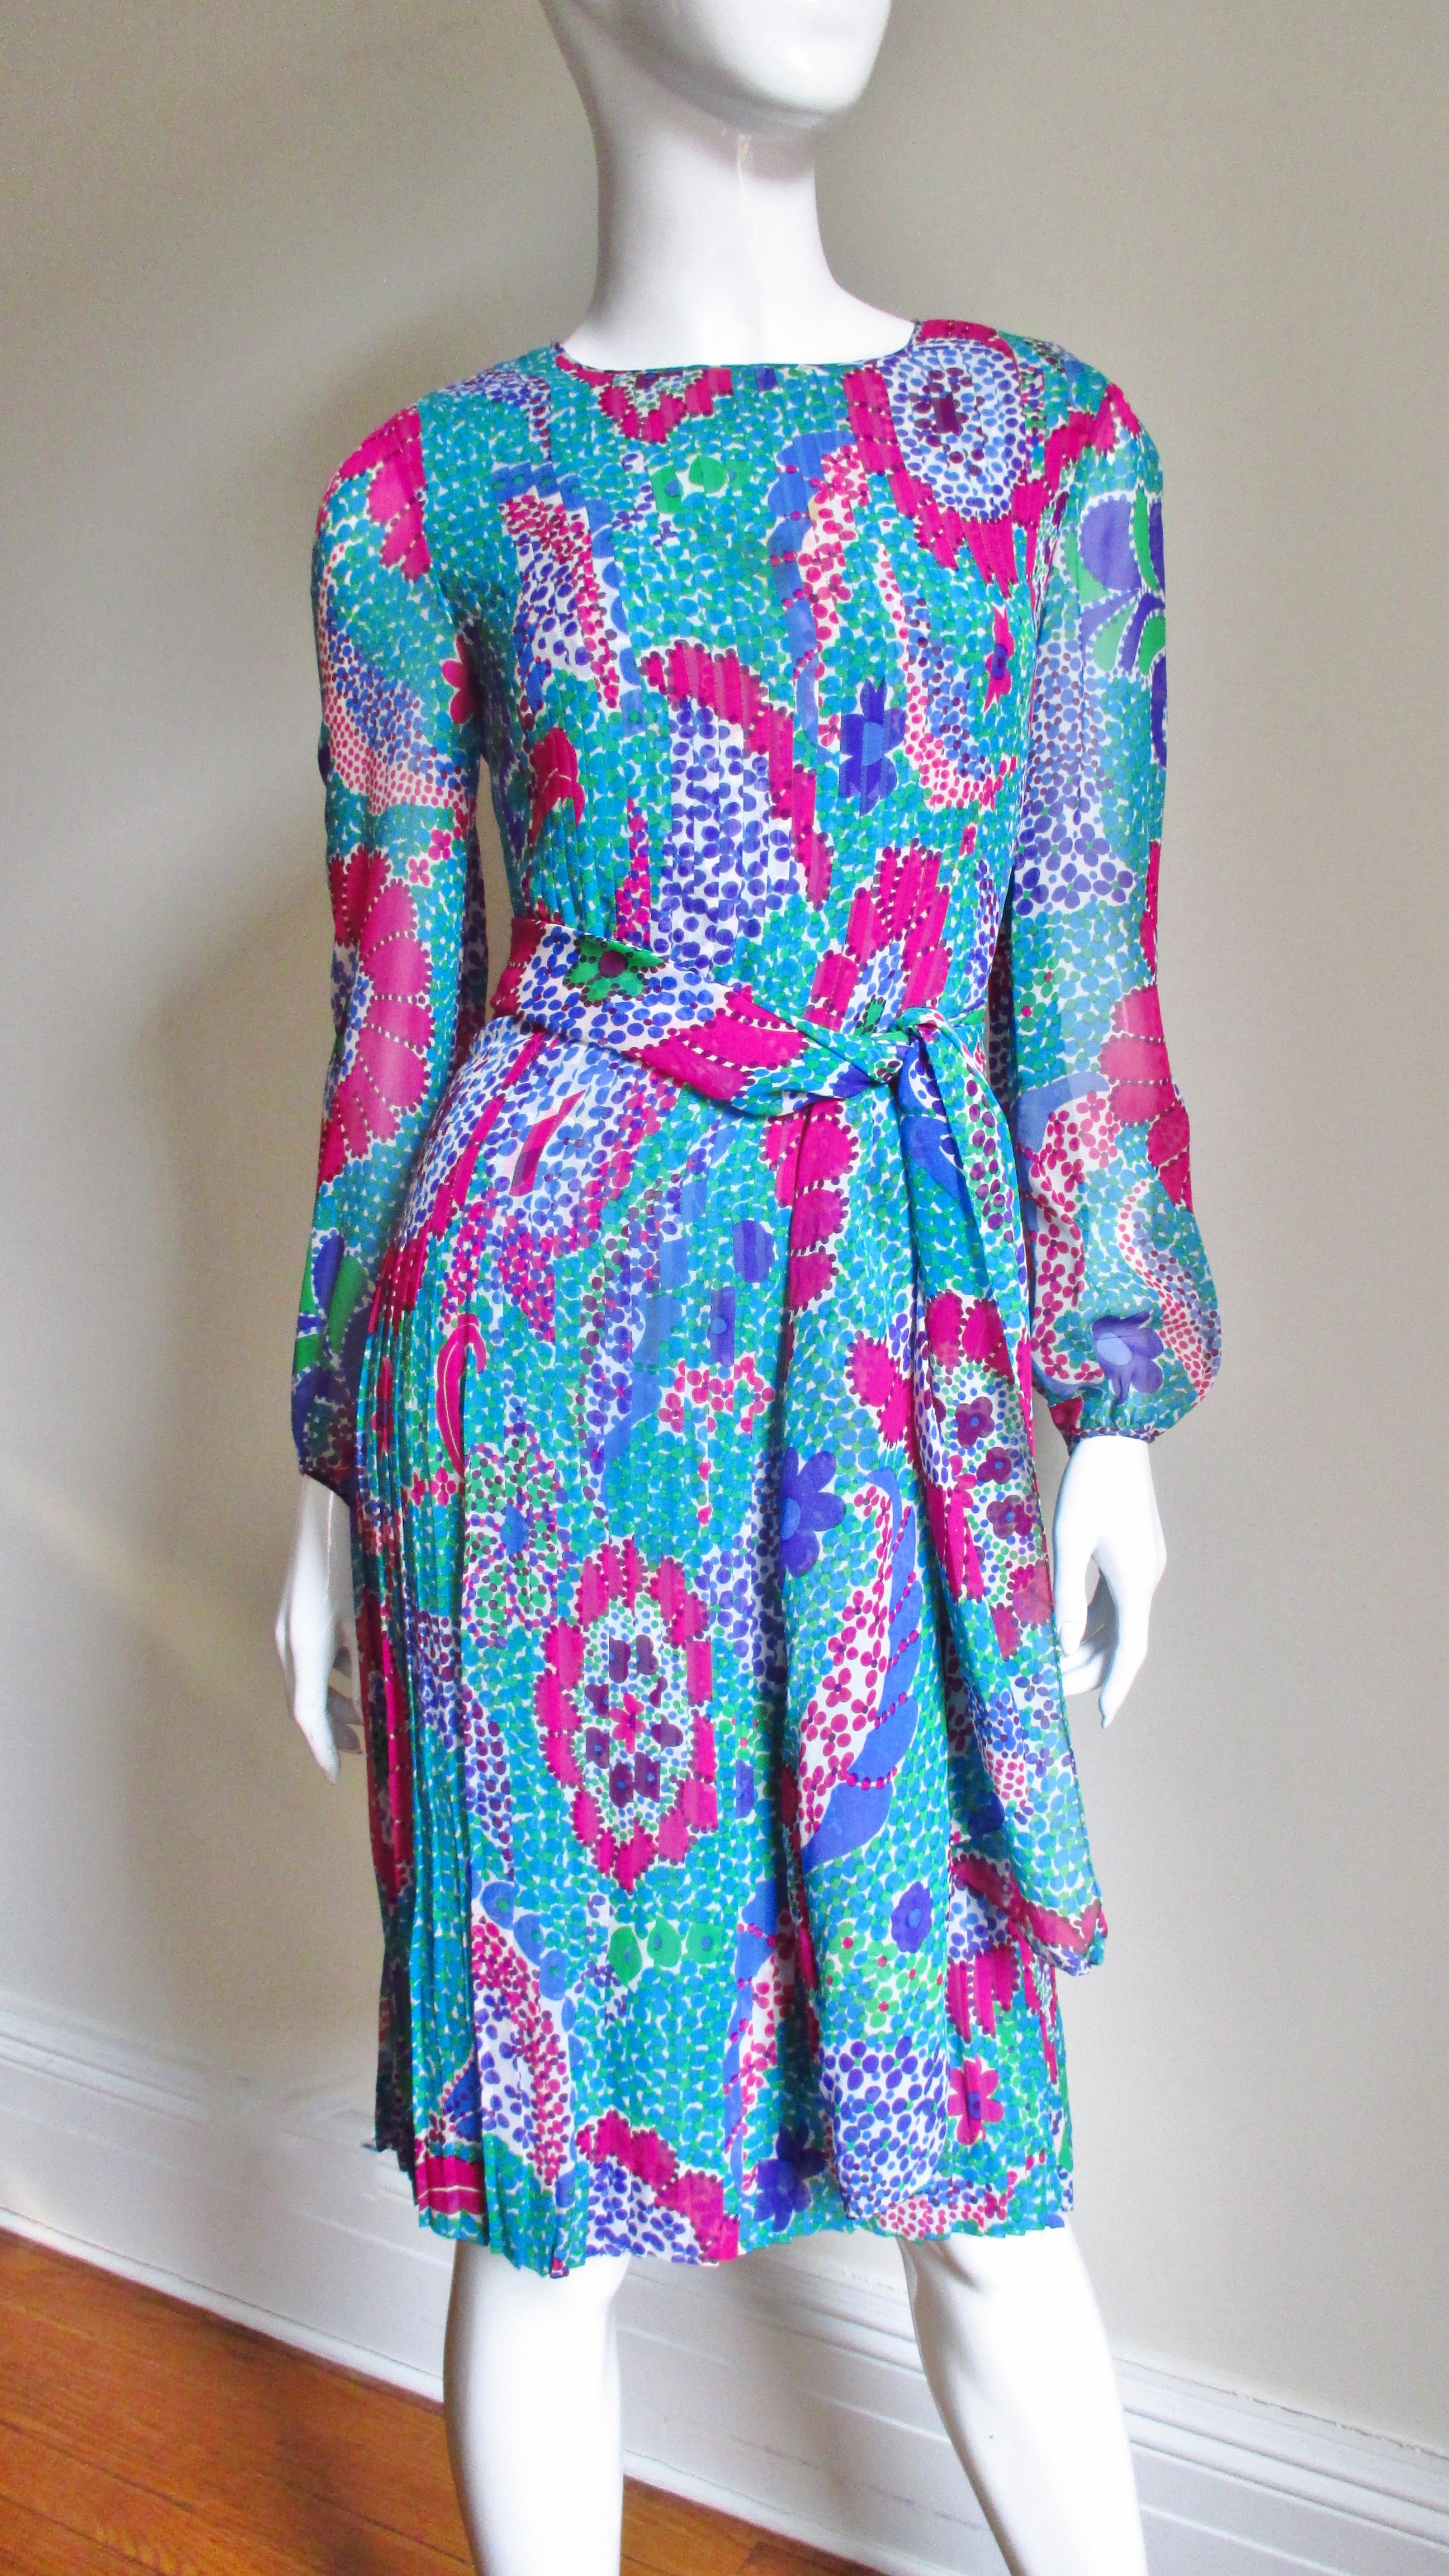 A fabulous 1960's silk dress from Pierre Cardin in a brightly colored abstract print in blues, green, fuchsia and white. It has semi sheer full sleeves which gather at the wrists. The body of the dress has elaborate vertical seaming extending from